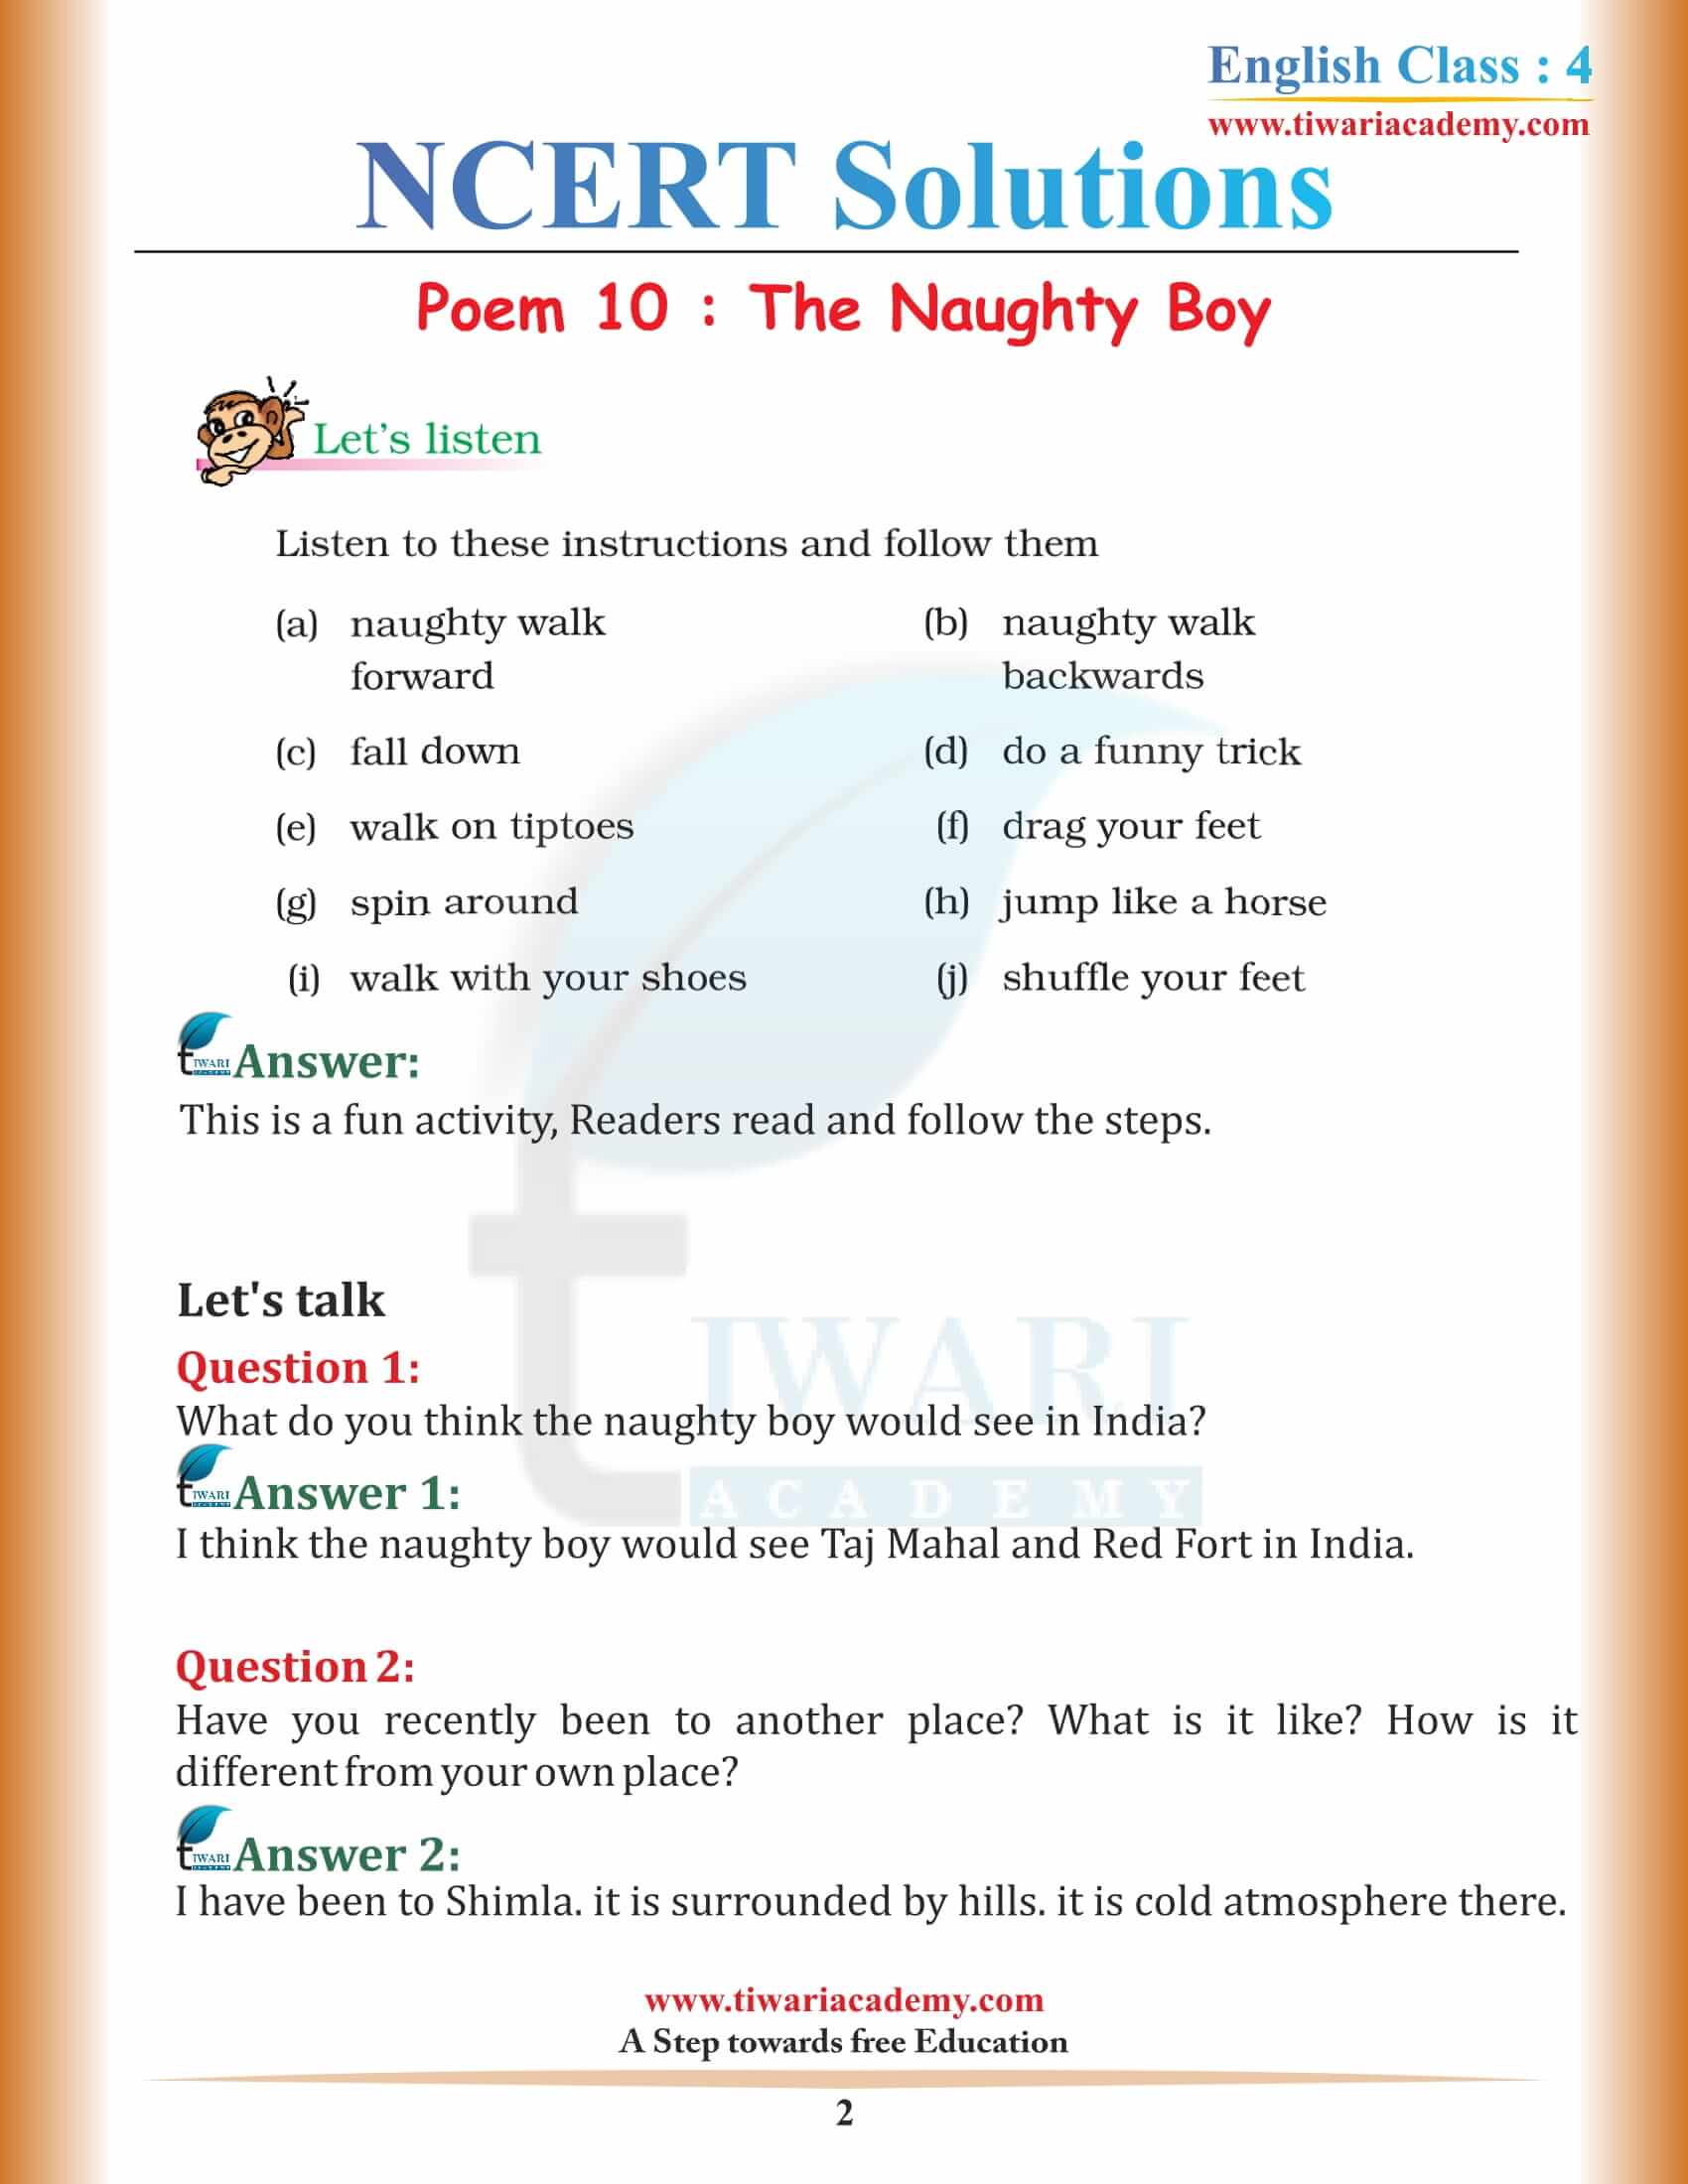 NCERT Solutions for Class 4 English Unit 10